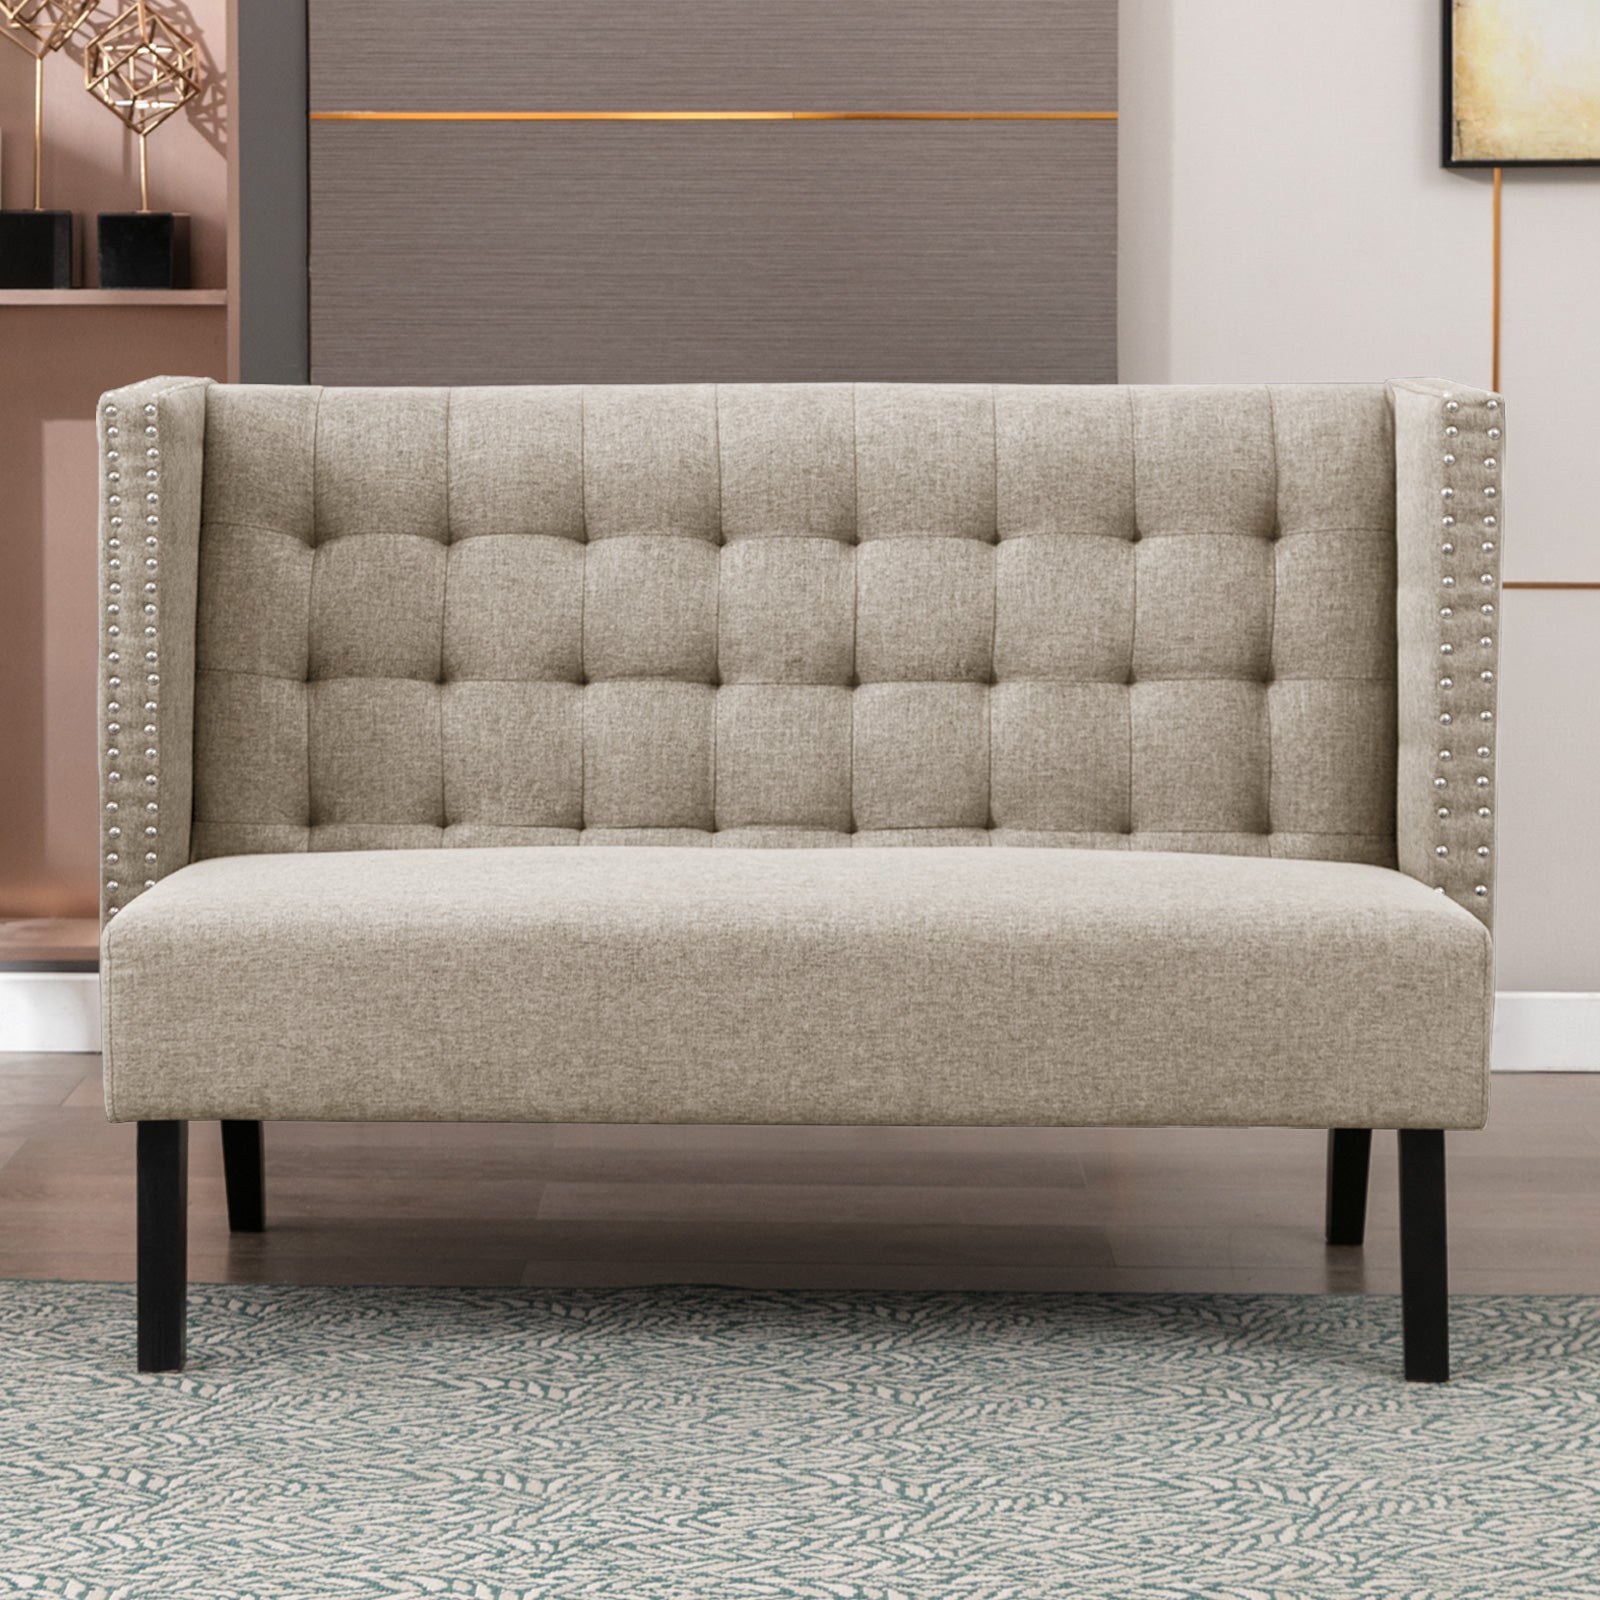 Mjkone Modern Settee Sofa Couch |Loveseat Bench Sofa Upholstered Diamond Shaped Button Tufting High Back Comfortable for Living Room